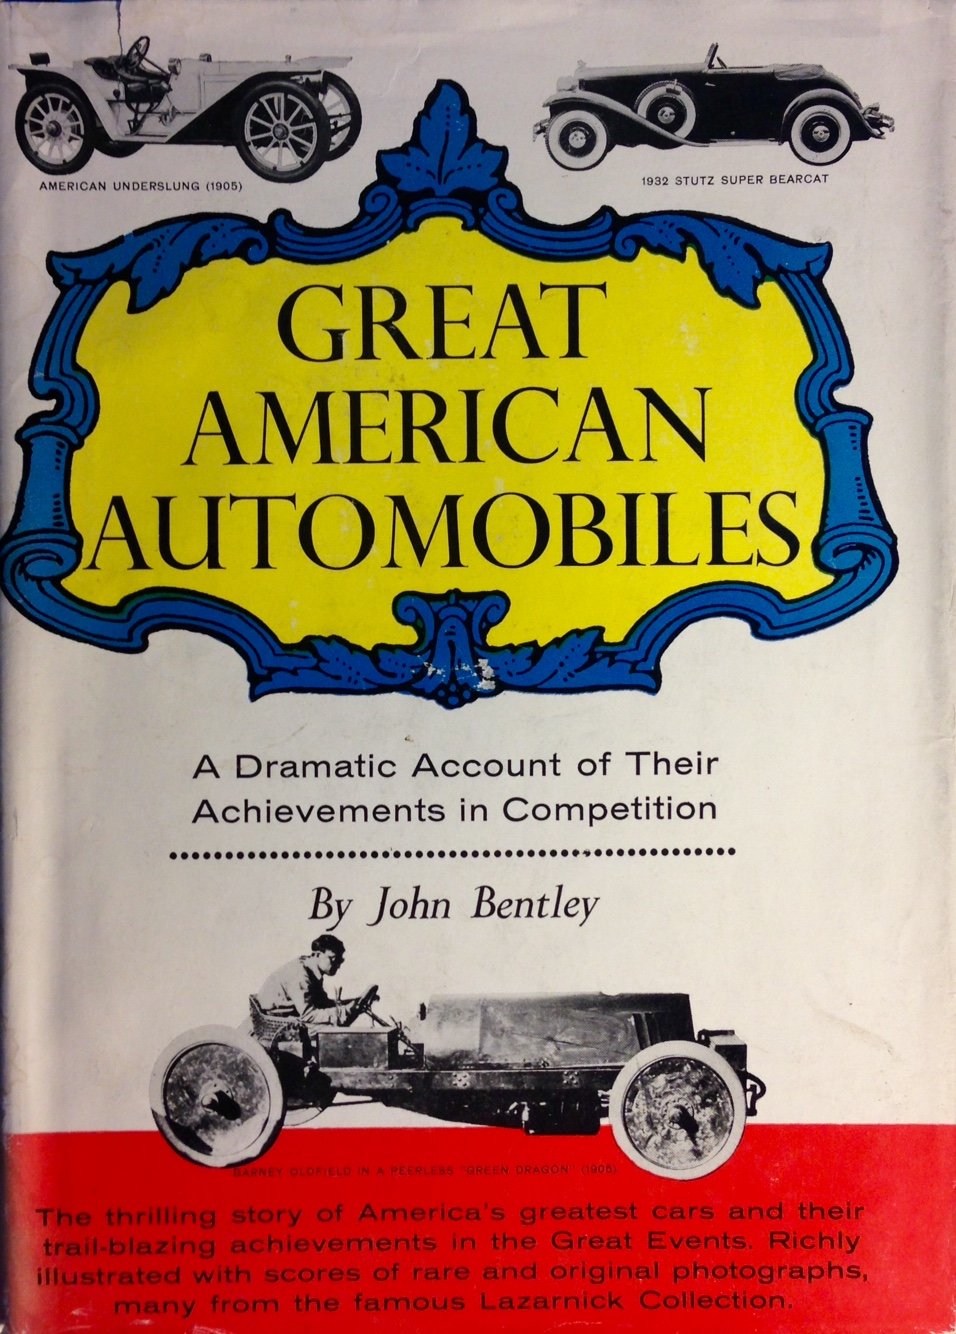 Great American Automobiles: A Dramatic Account of Their Achievements in Competition